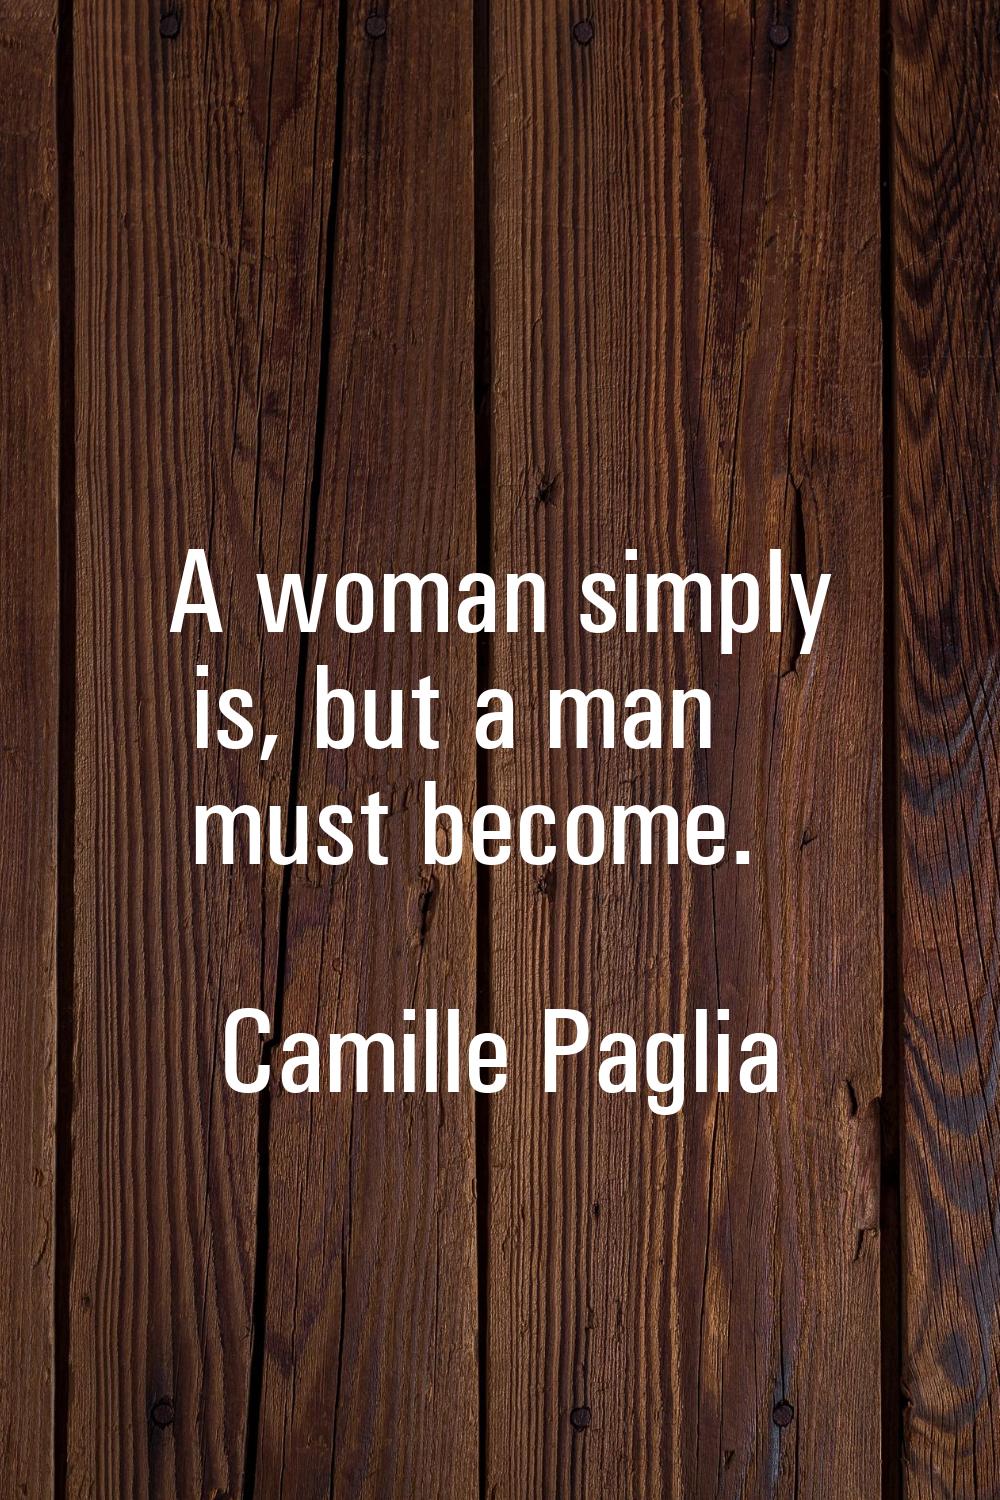 A woman simply is, but a man must become.